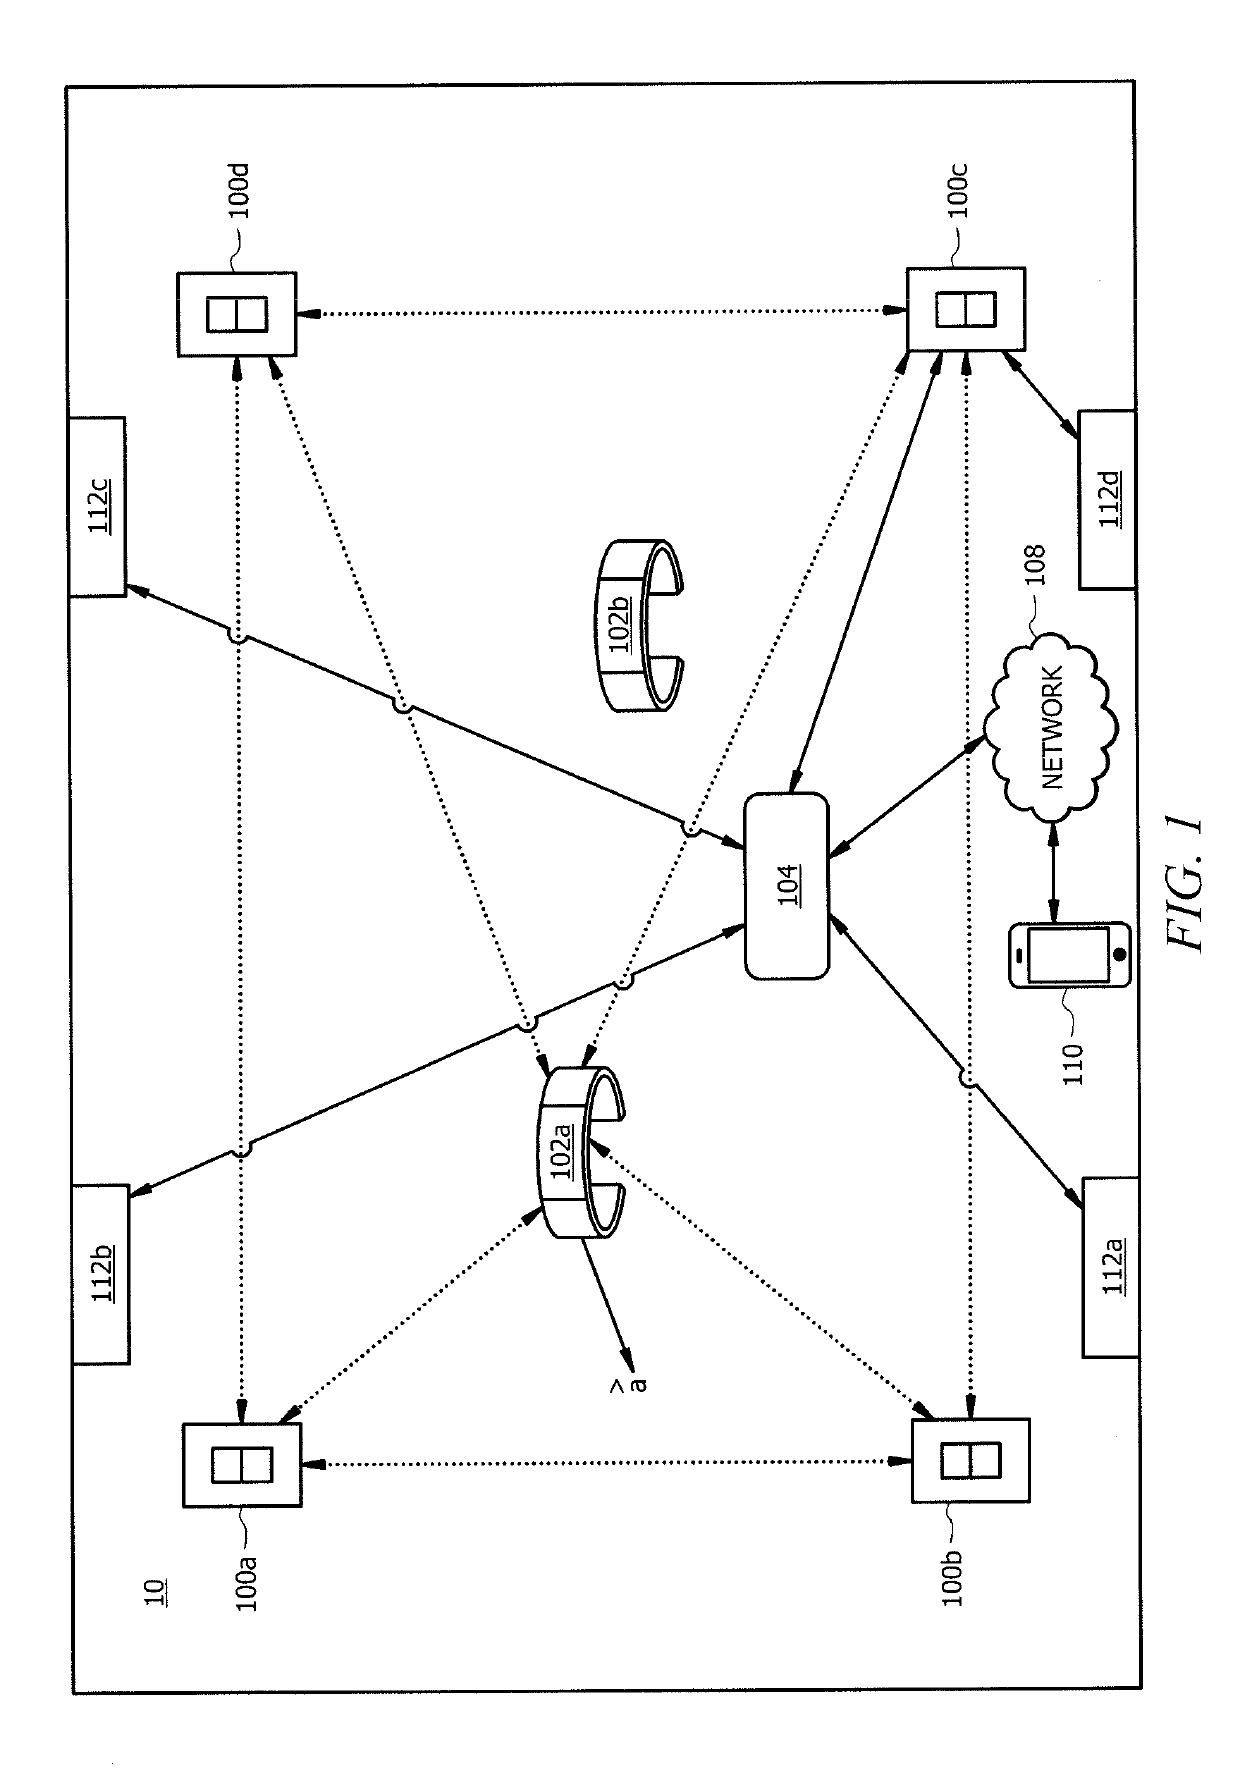 Indoor Position and Vector Tracking System and Method